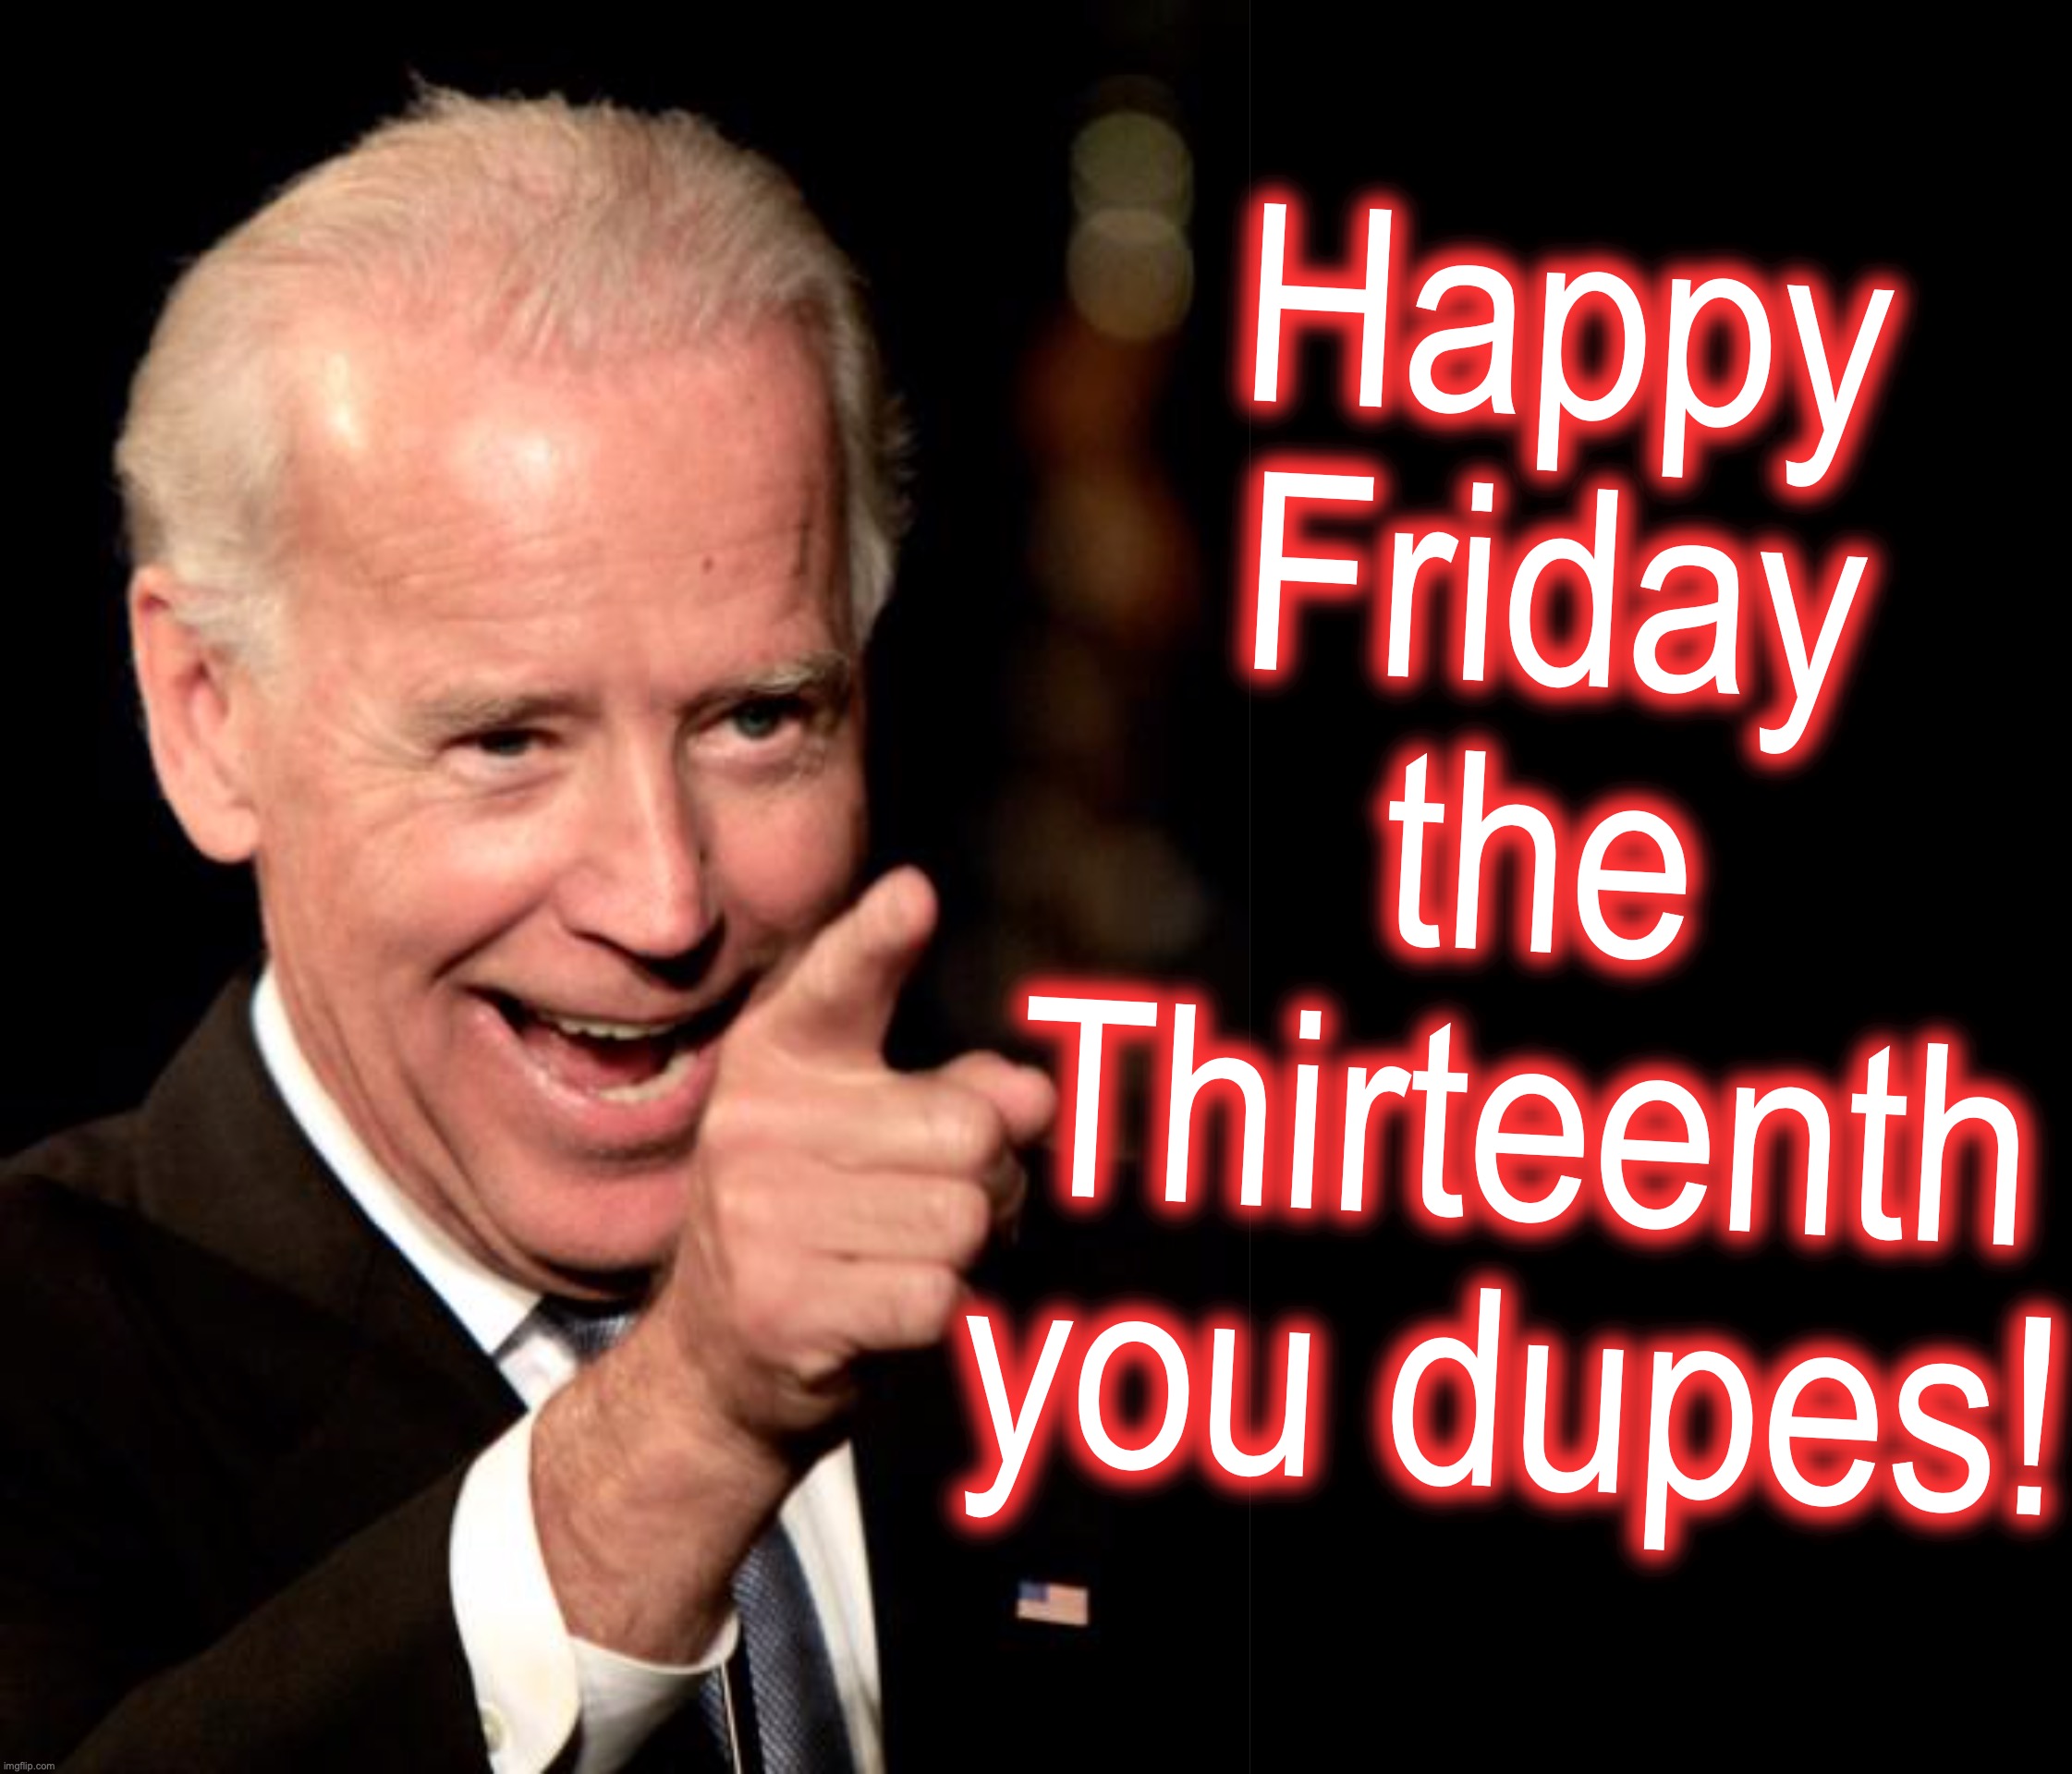 Happy Friday the Thirteenth you dupes! | image tagged in memes,smilin biden,black box | made w/ Imgflip meme maker